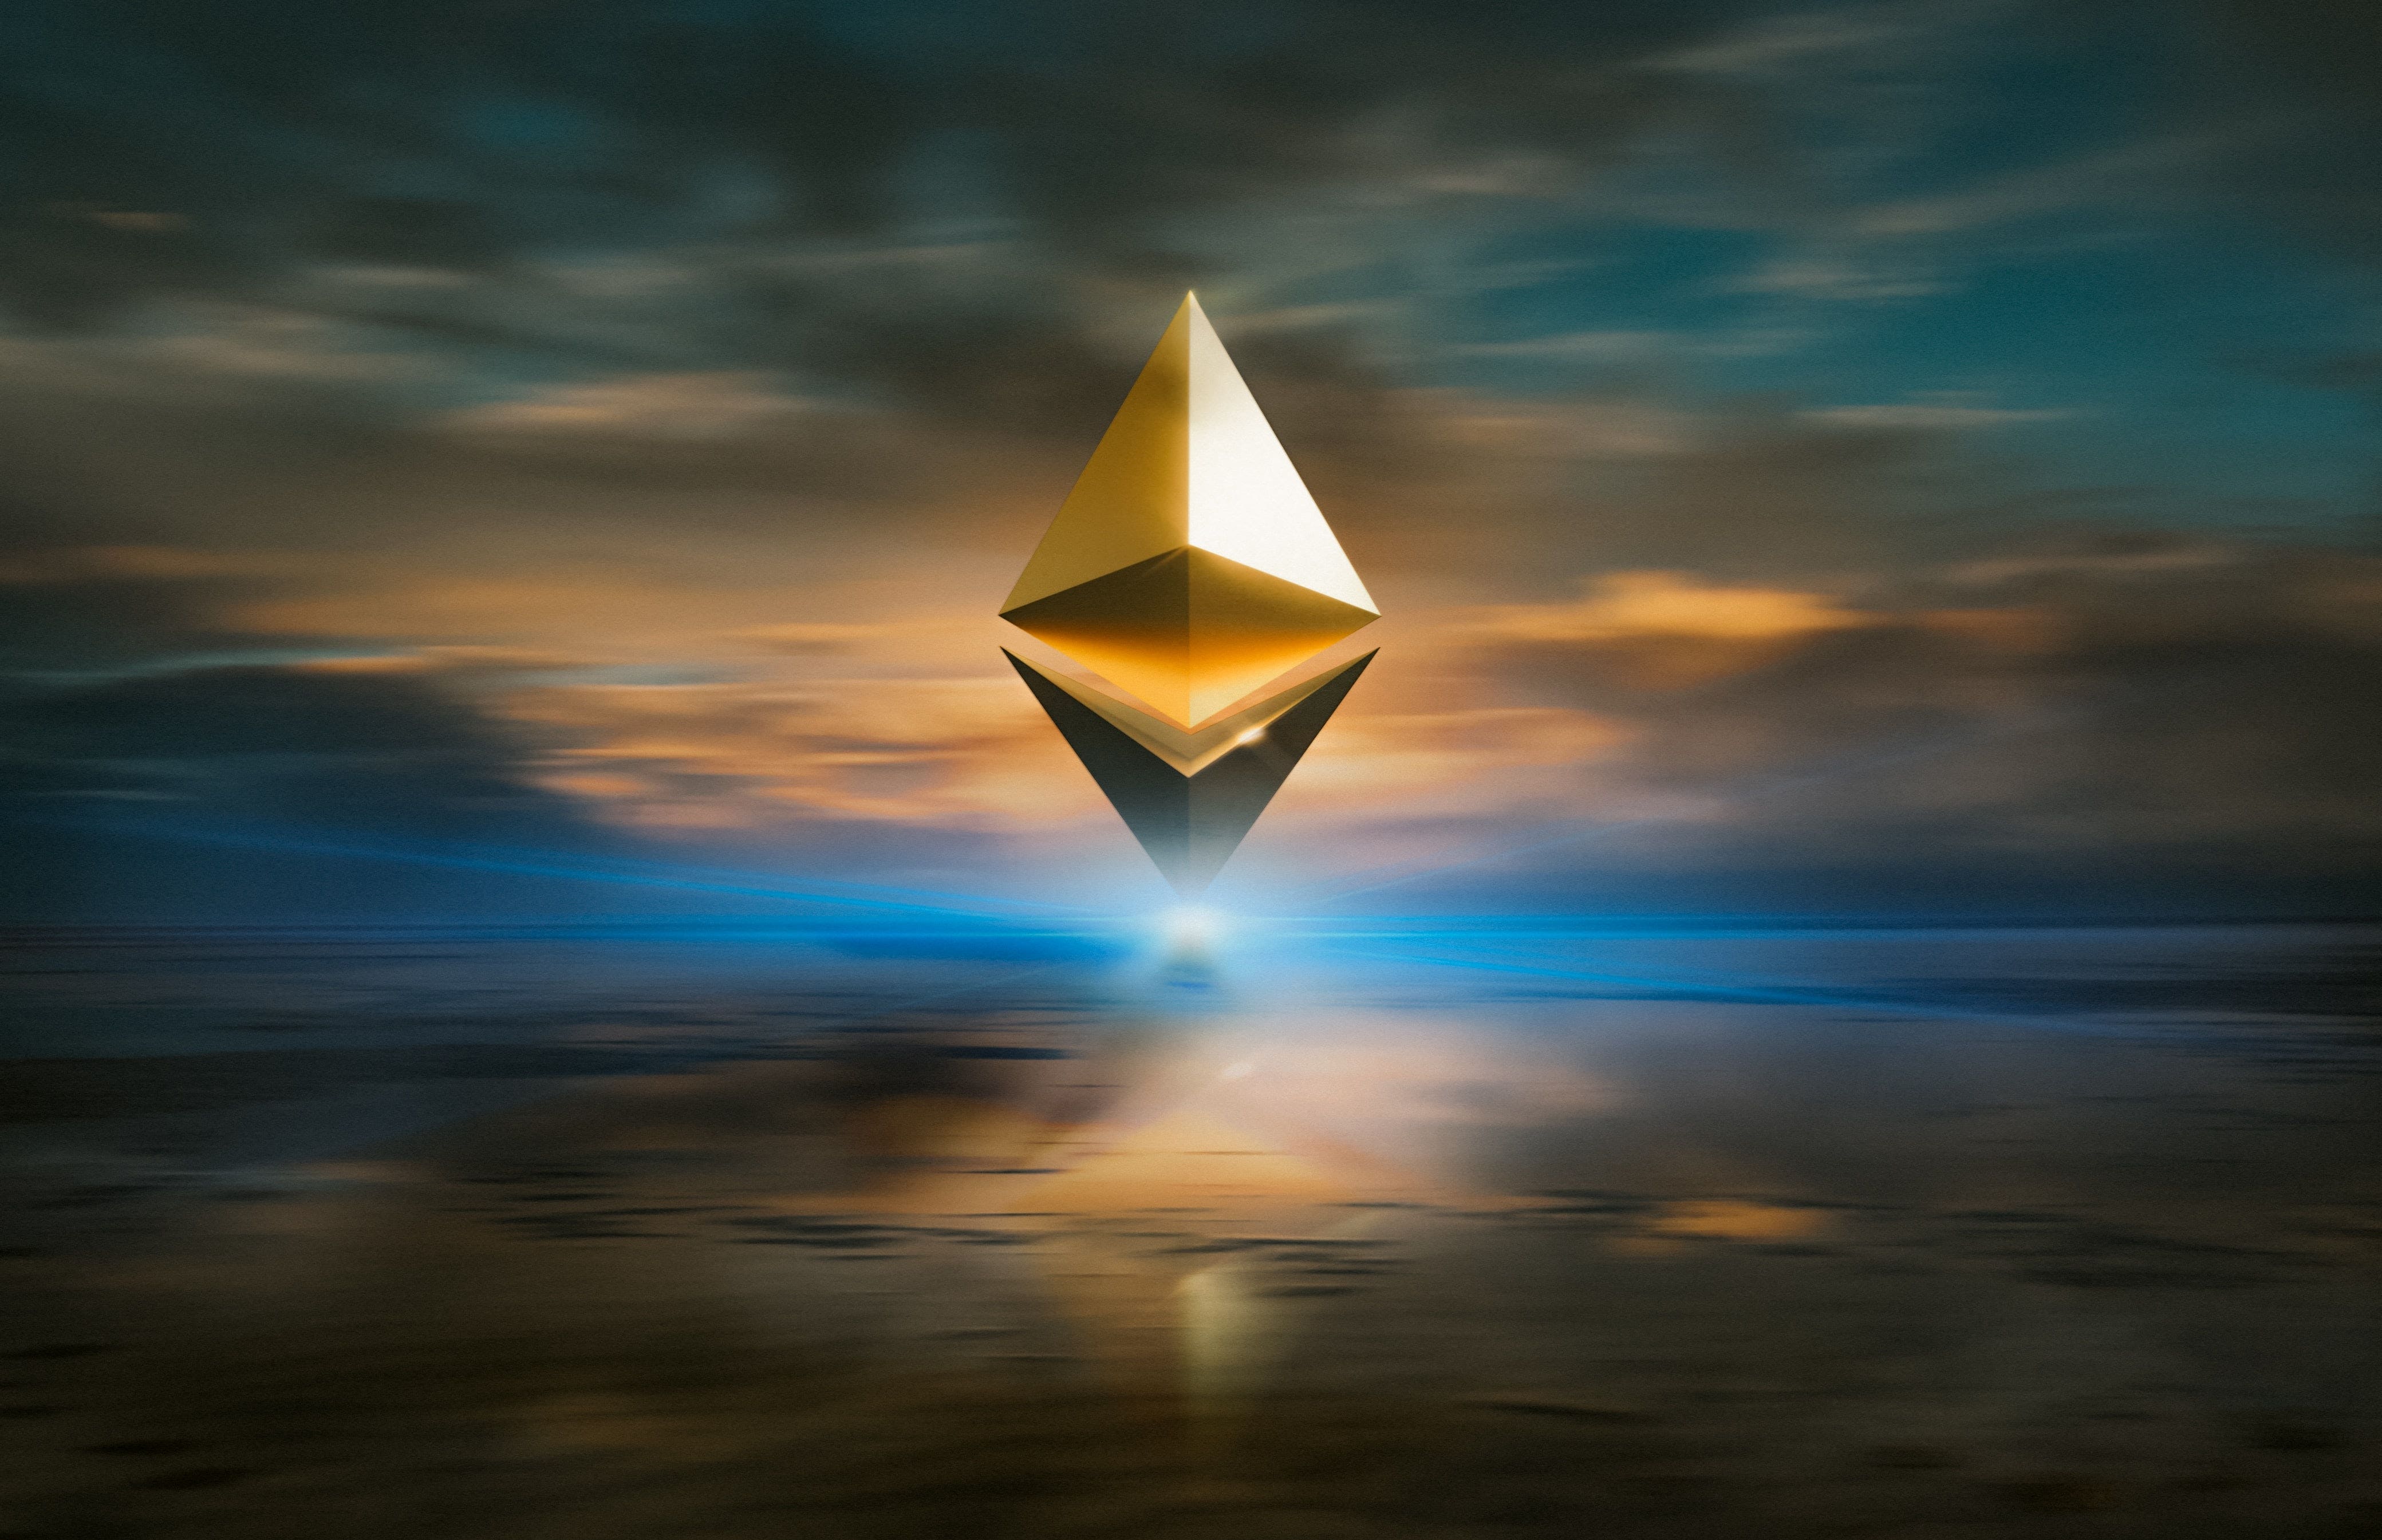 Ethereum Hits All-Time High, Bitcoin Traders Look Forward To Bull Market, Dogecoin Holds It Together But This Coin Remains King